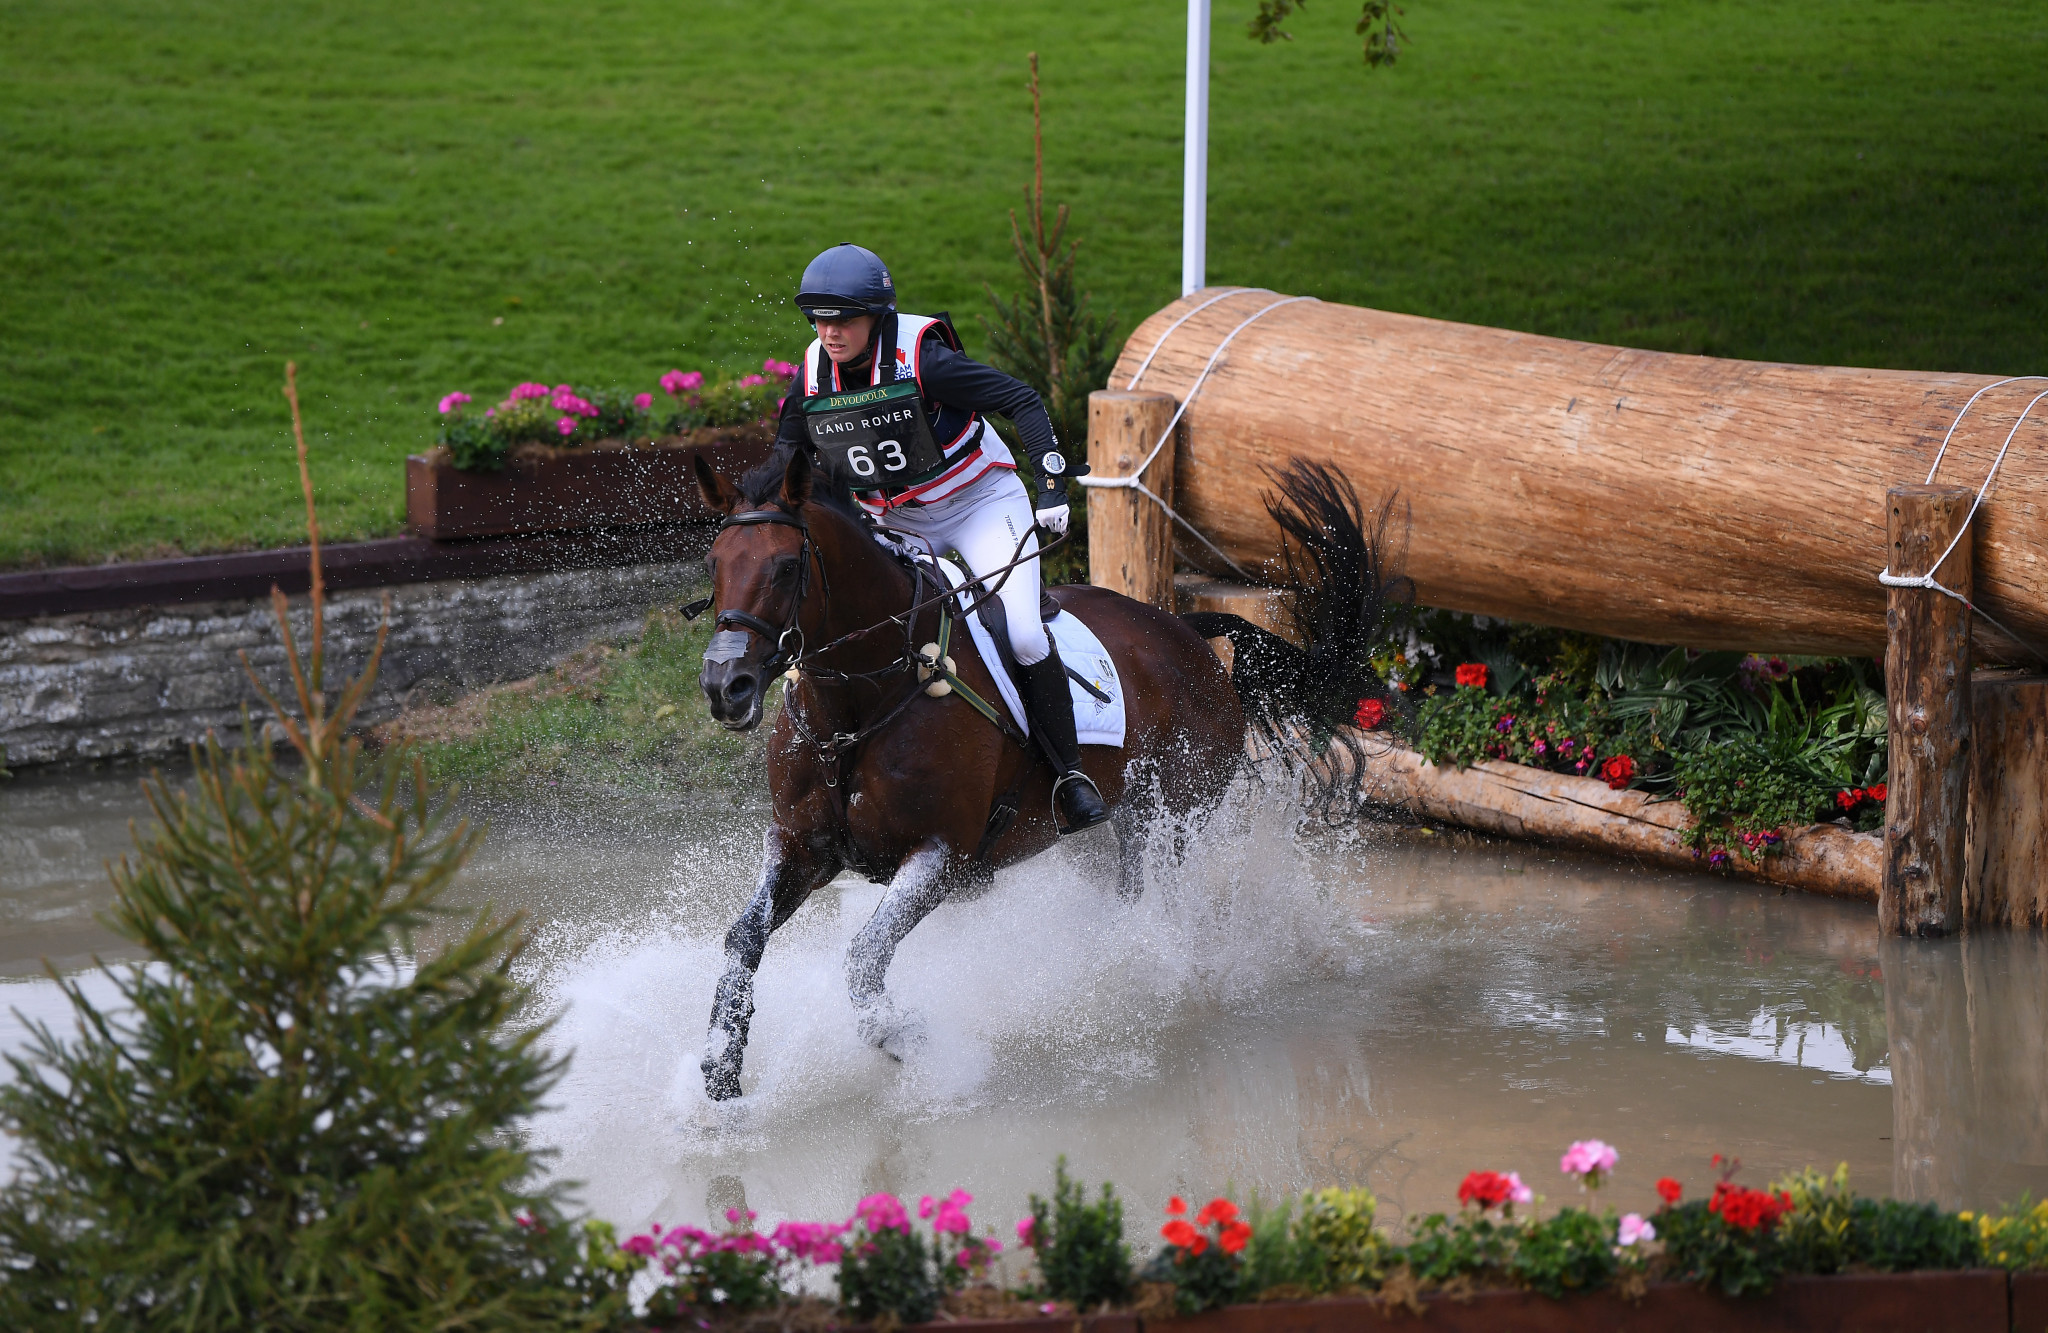 Piggy French, riding Vanir Kamira, won the Badminton Horse Trials the last time the competition was staged, in 2019 ©Getty Images